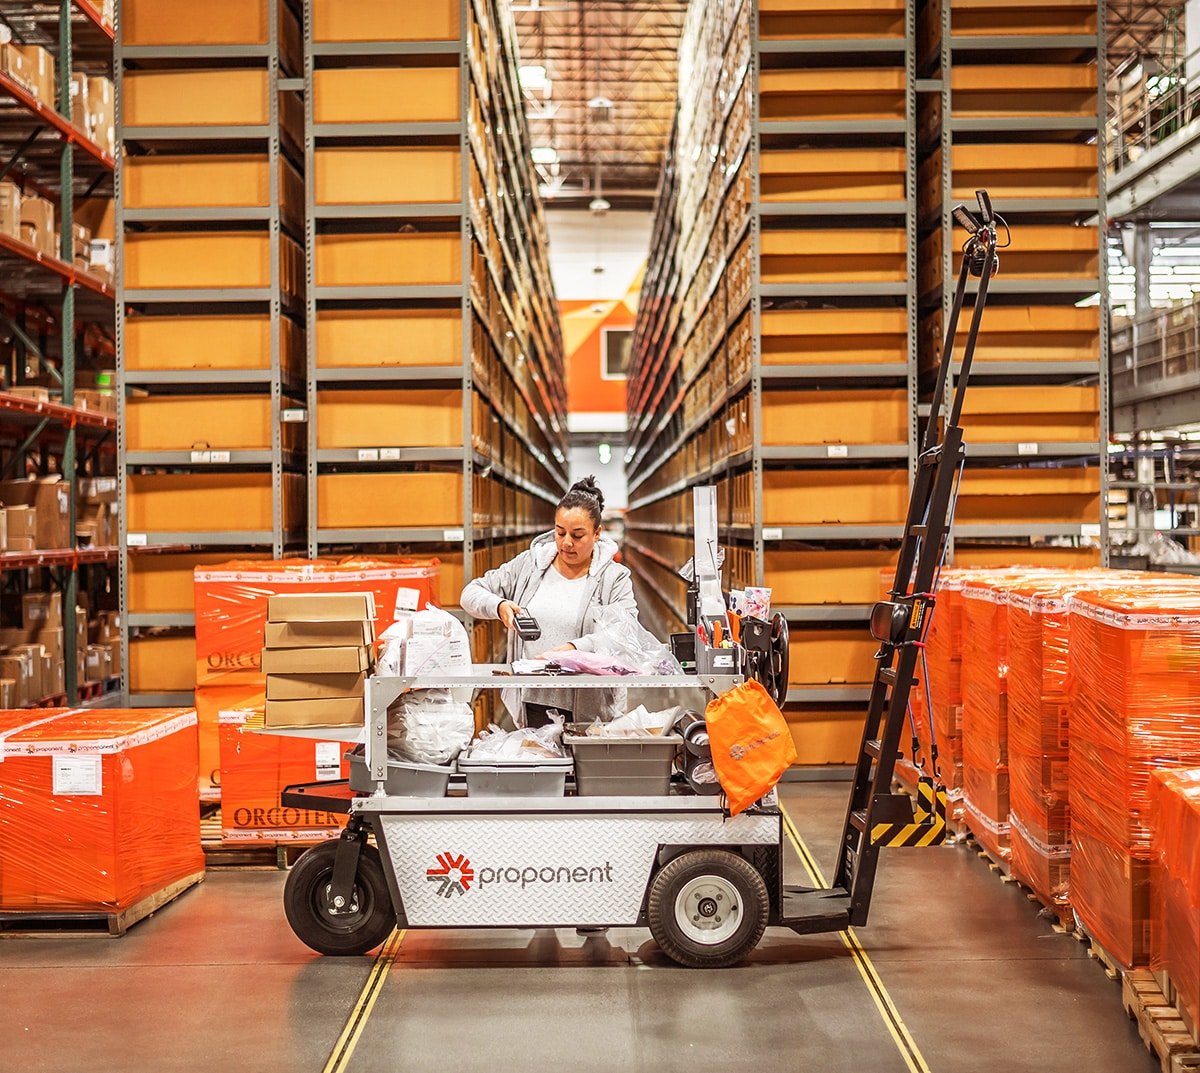 A woman scans an item in a warehouse, on top of a Proponent branded cart.